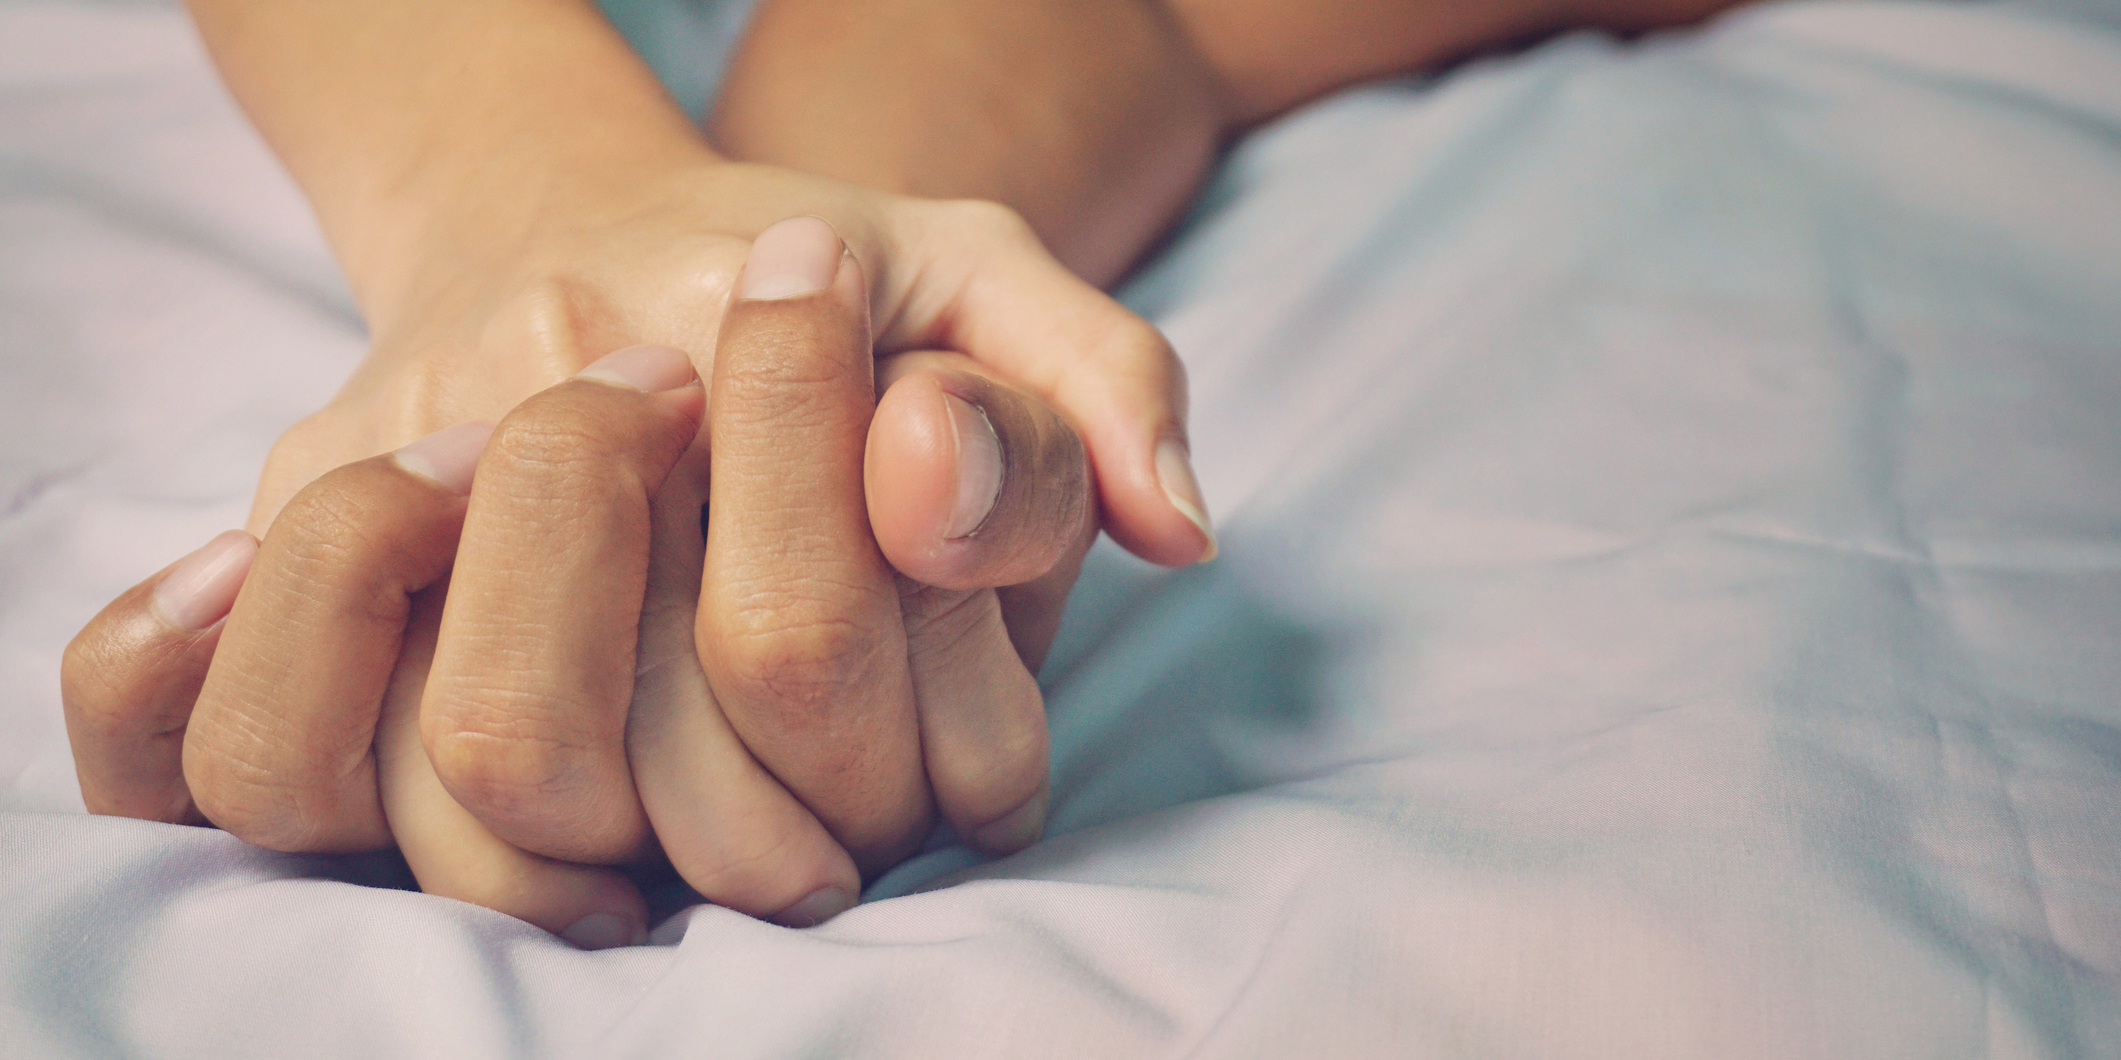 Two people holding hands in bed